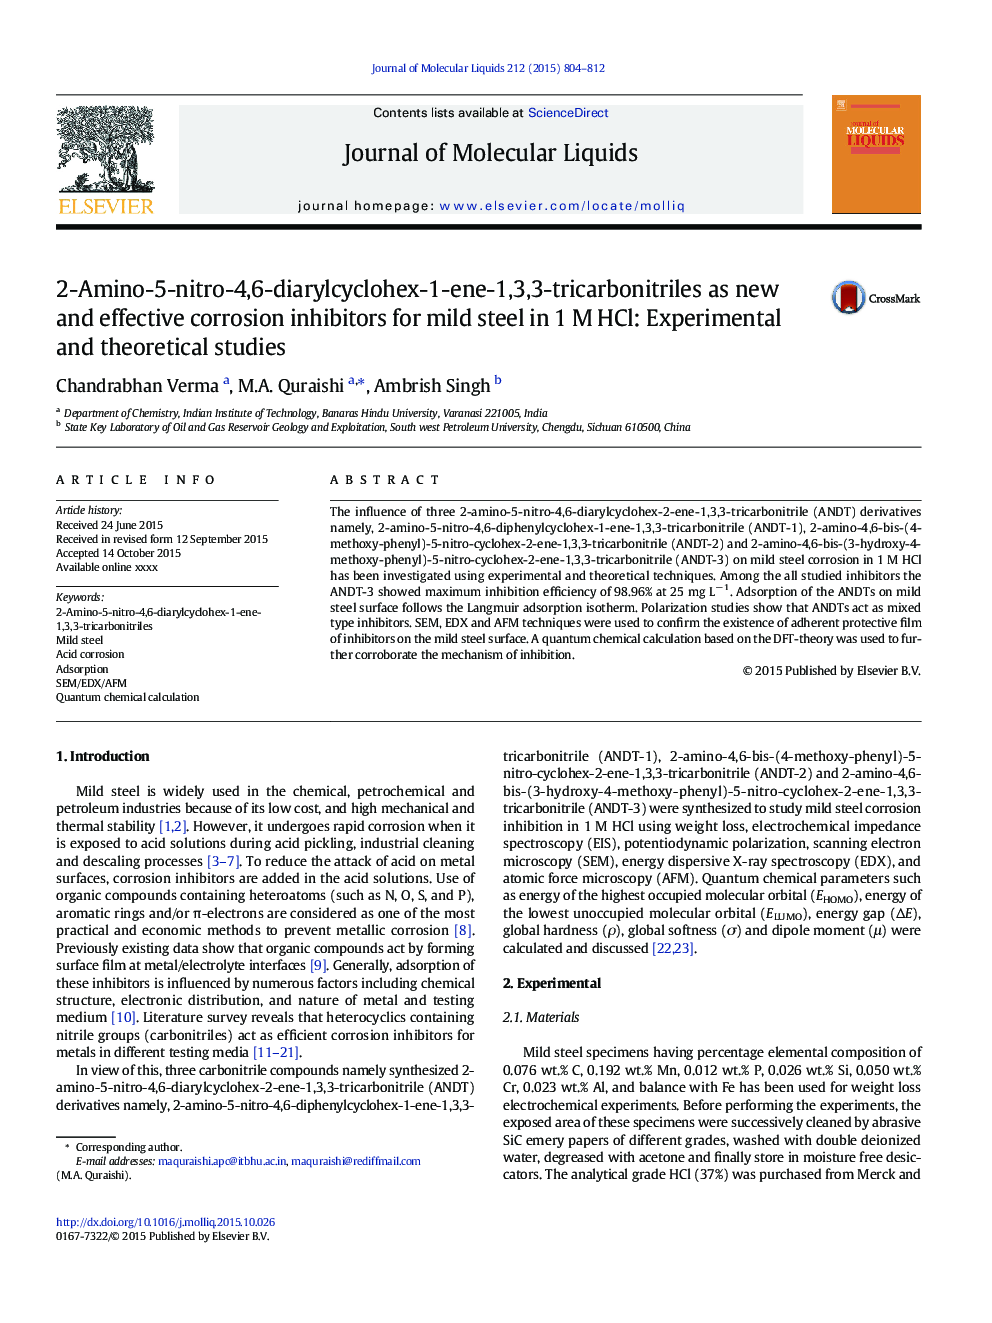 2-Amino-5-nitro-4,6-diarylcyclohex-1-ene-1,3,3-tricarbonitriles as new and effective corrosion inhibitors for mild steel in 1Â M HCl: Experimental and theoretical studies